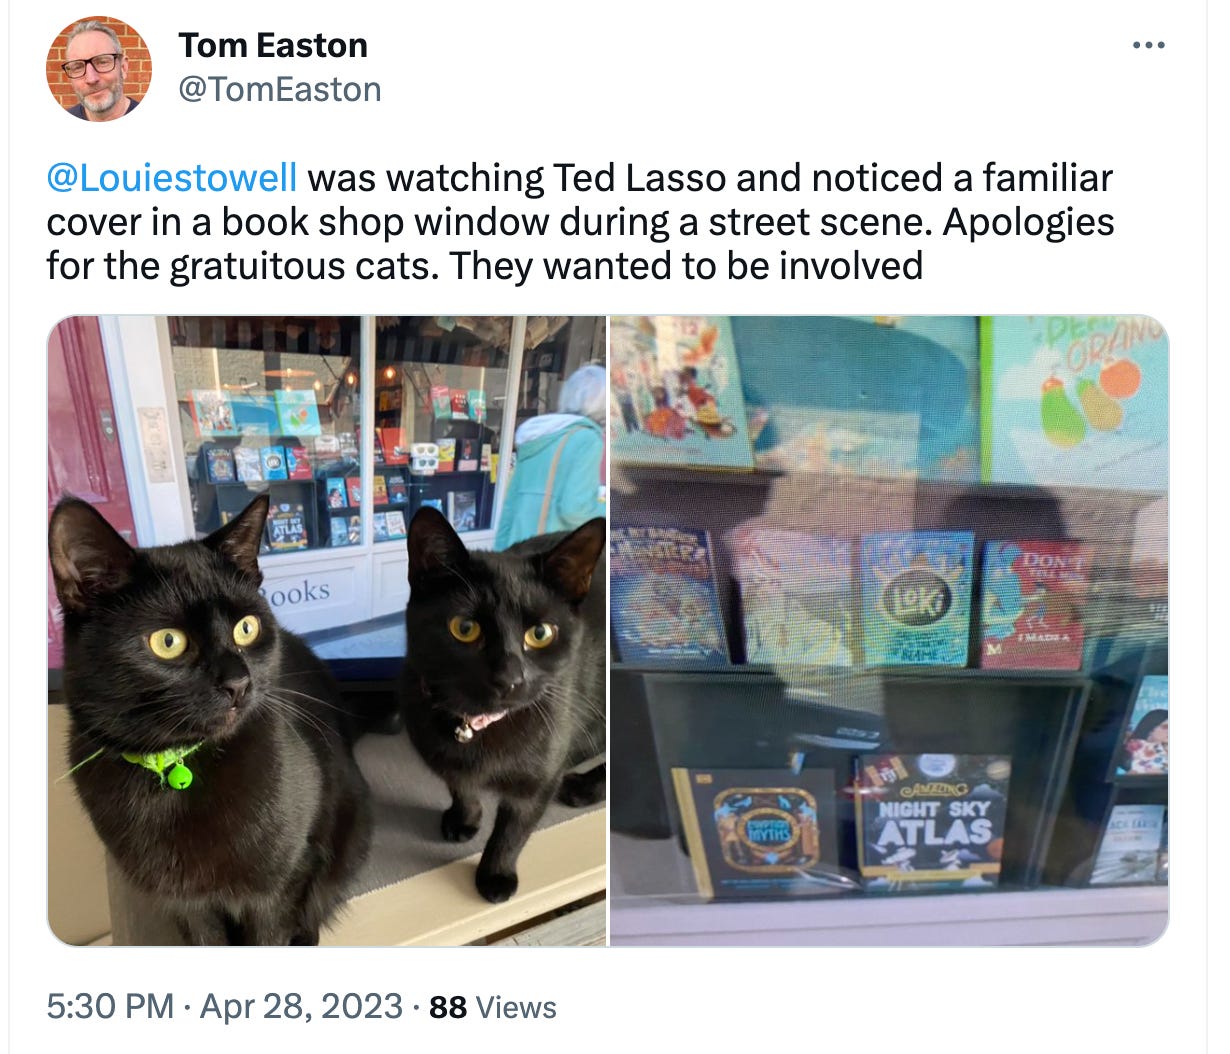 Screenshot of a tweet showing Loki book 2 in the window of a bookshop on Ted Lasso with Tom Easton, the tweeter's cats in shot. He calls them "Gratuitous cats".